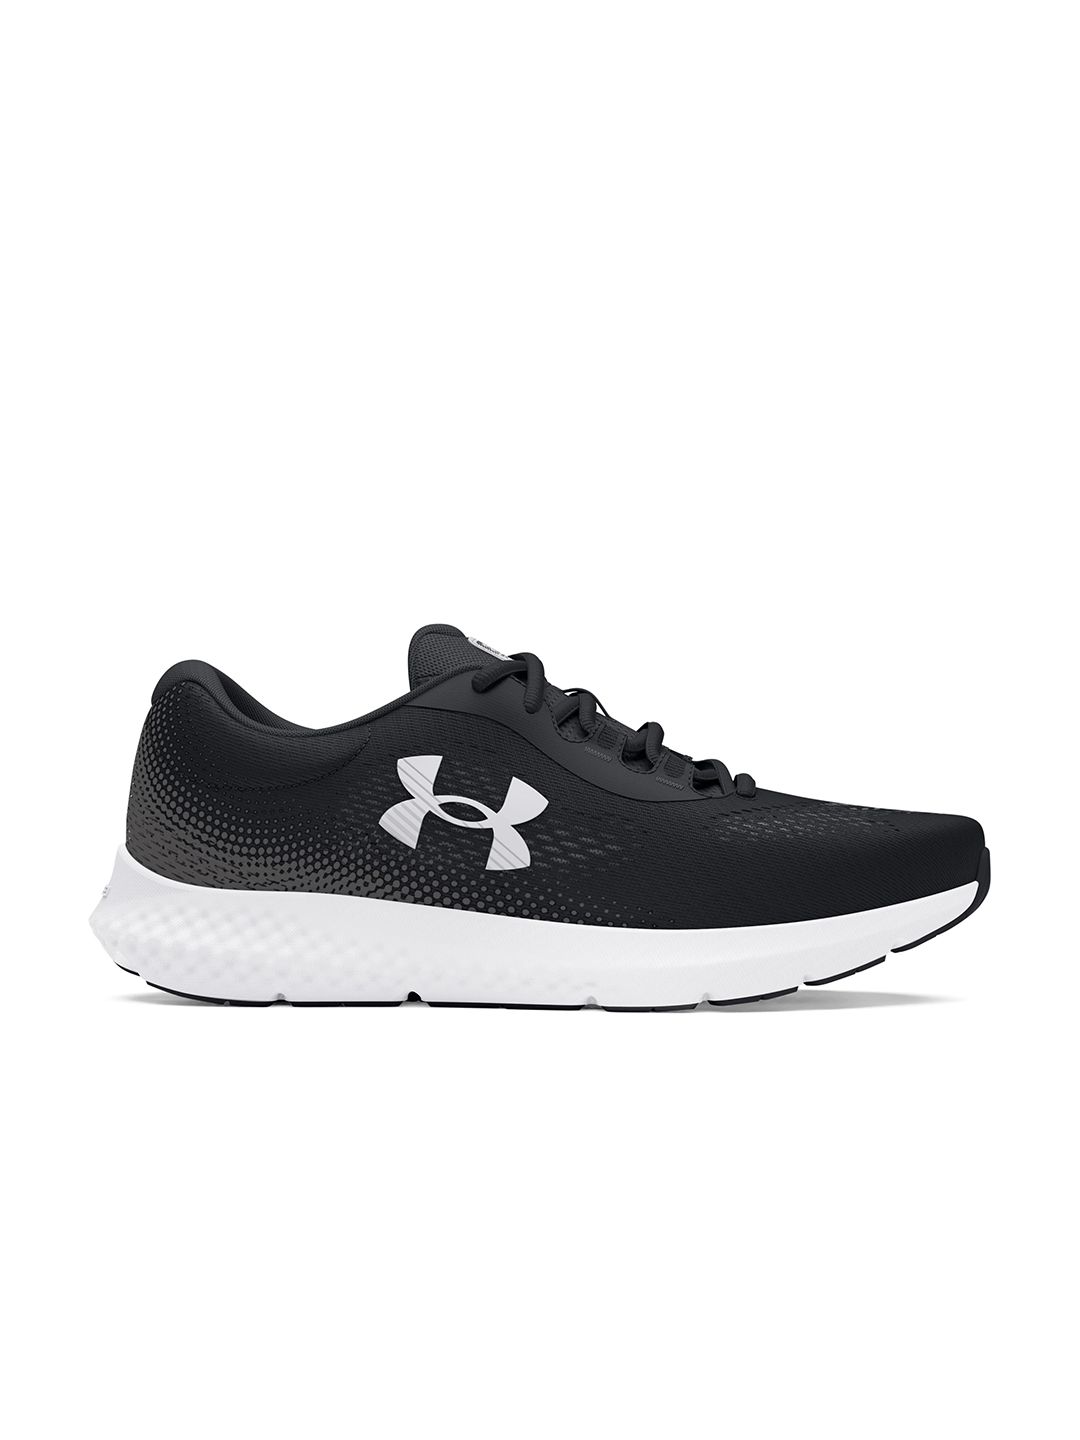 UNDER ARMOUR Women Woven Design Charged Rogue 4 Running Shoes